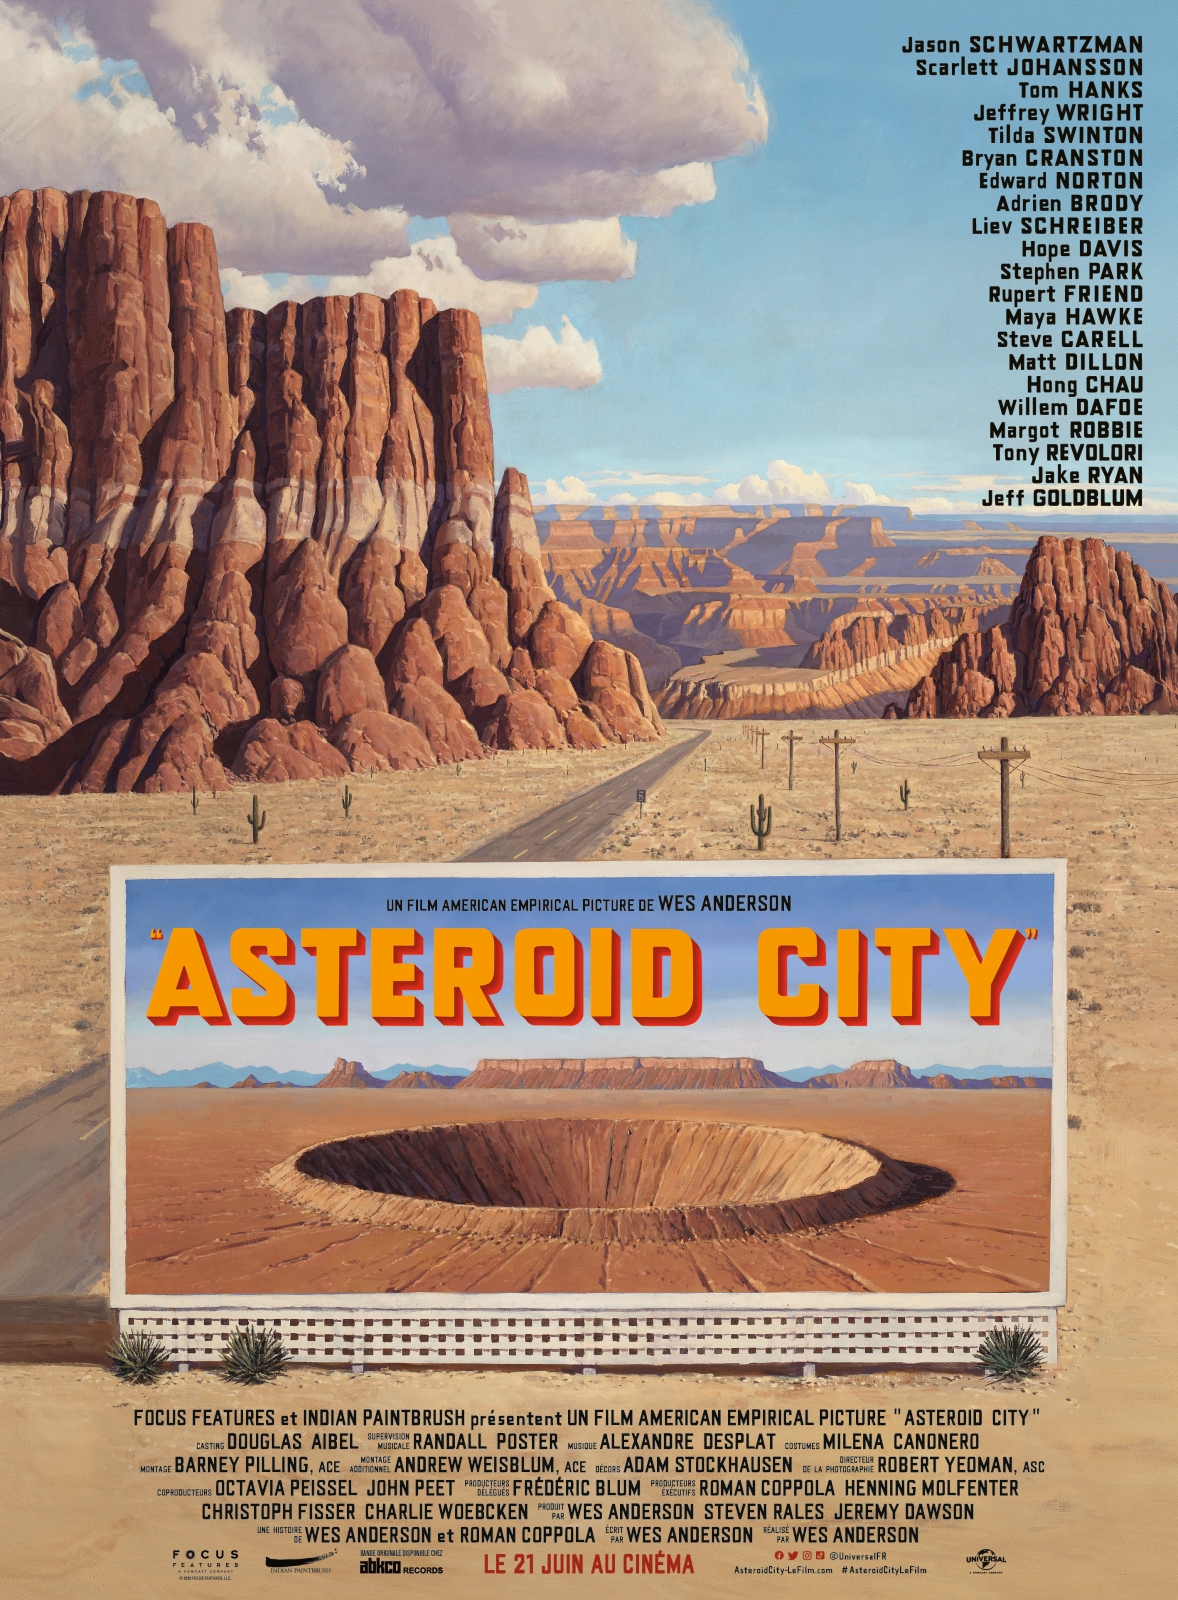 Asteroid City poster